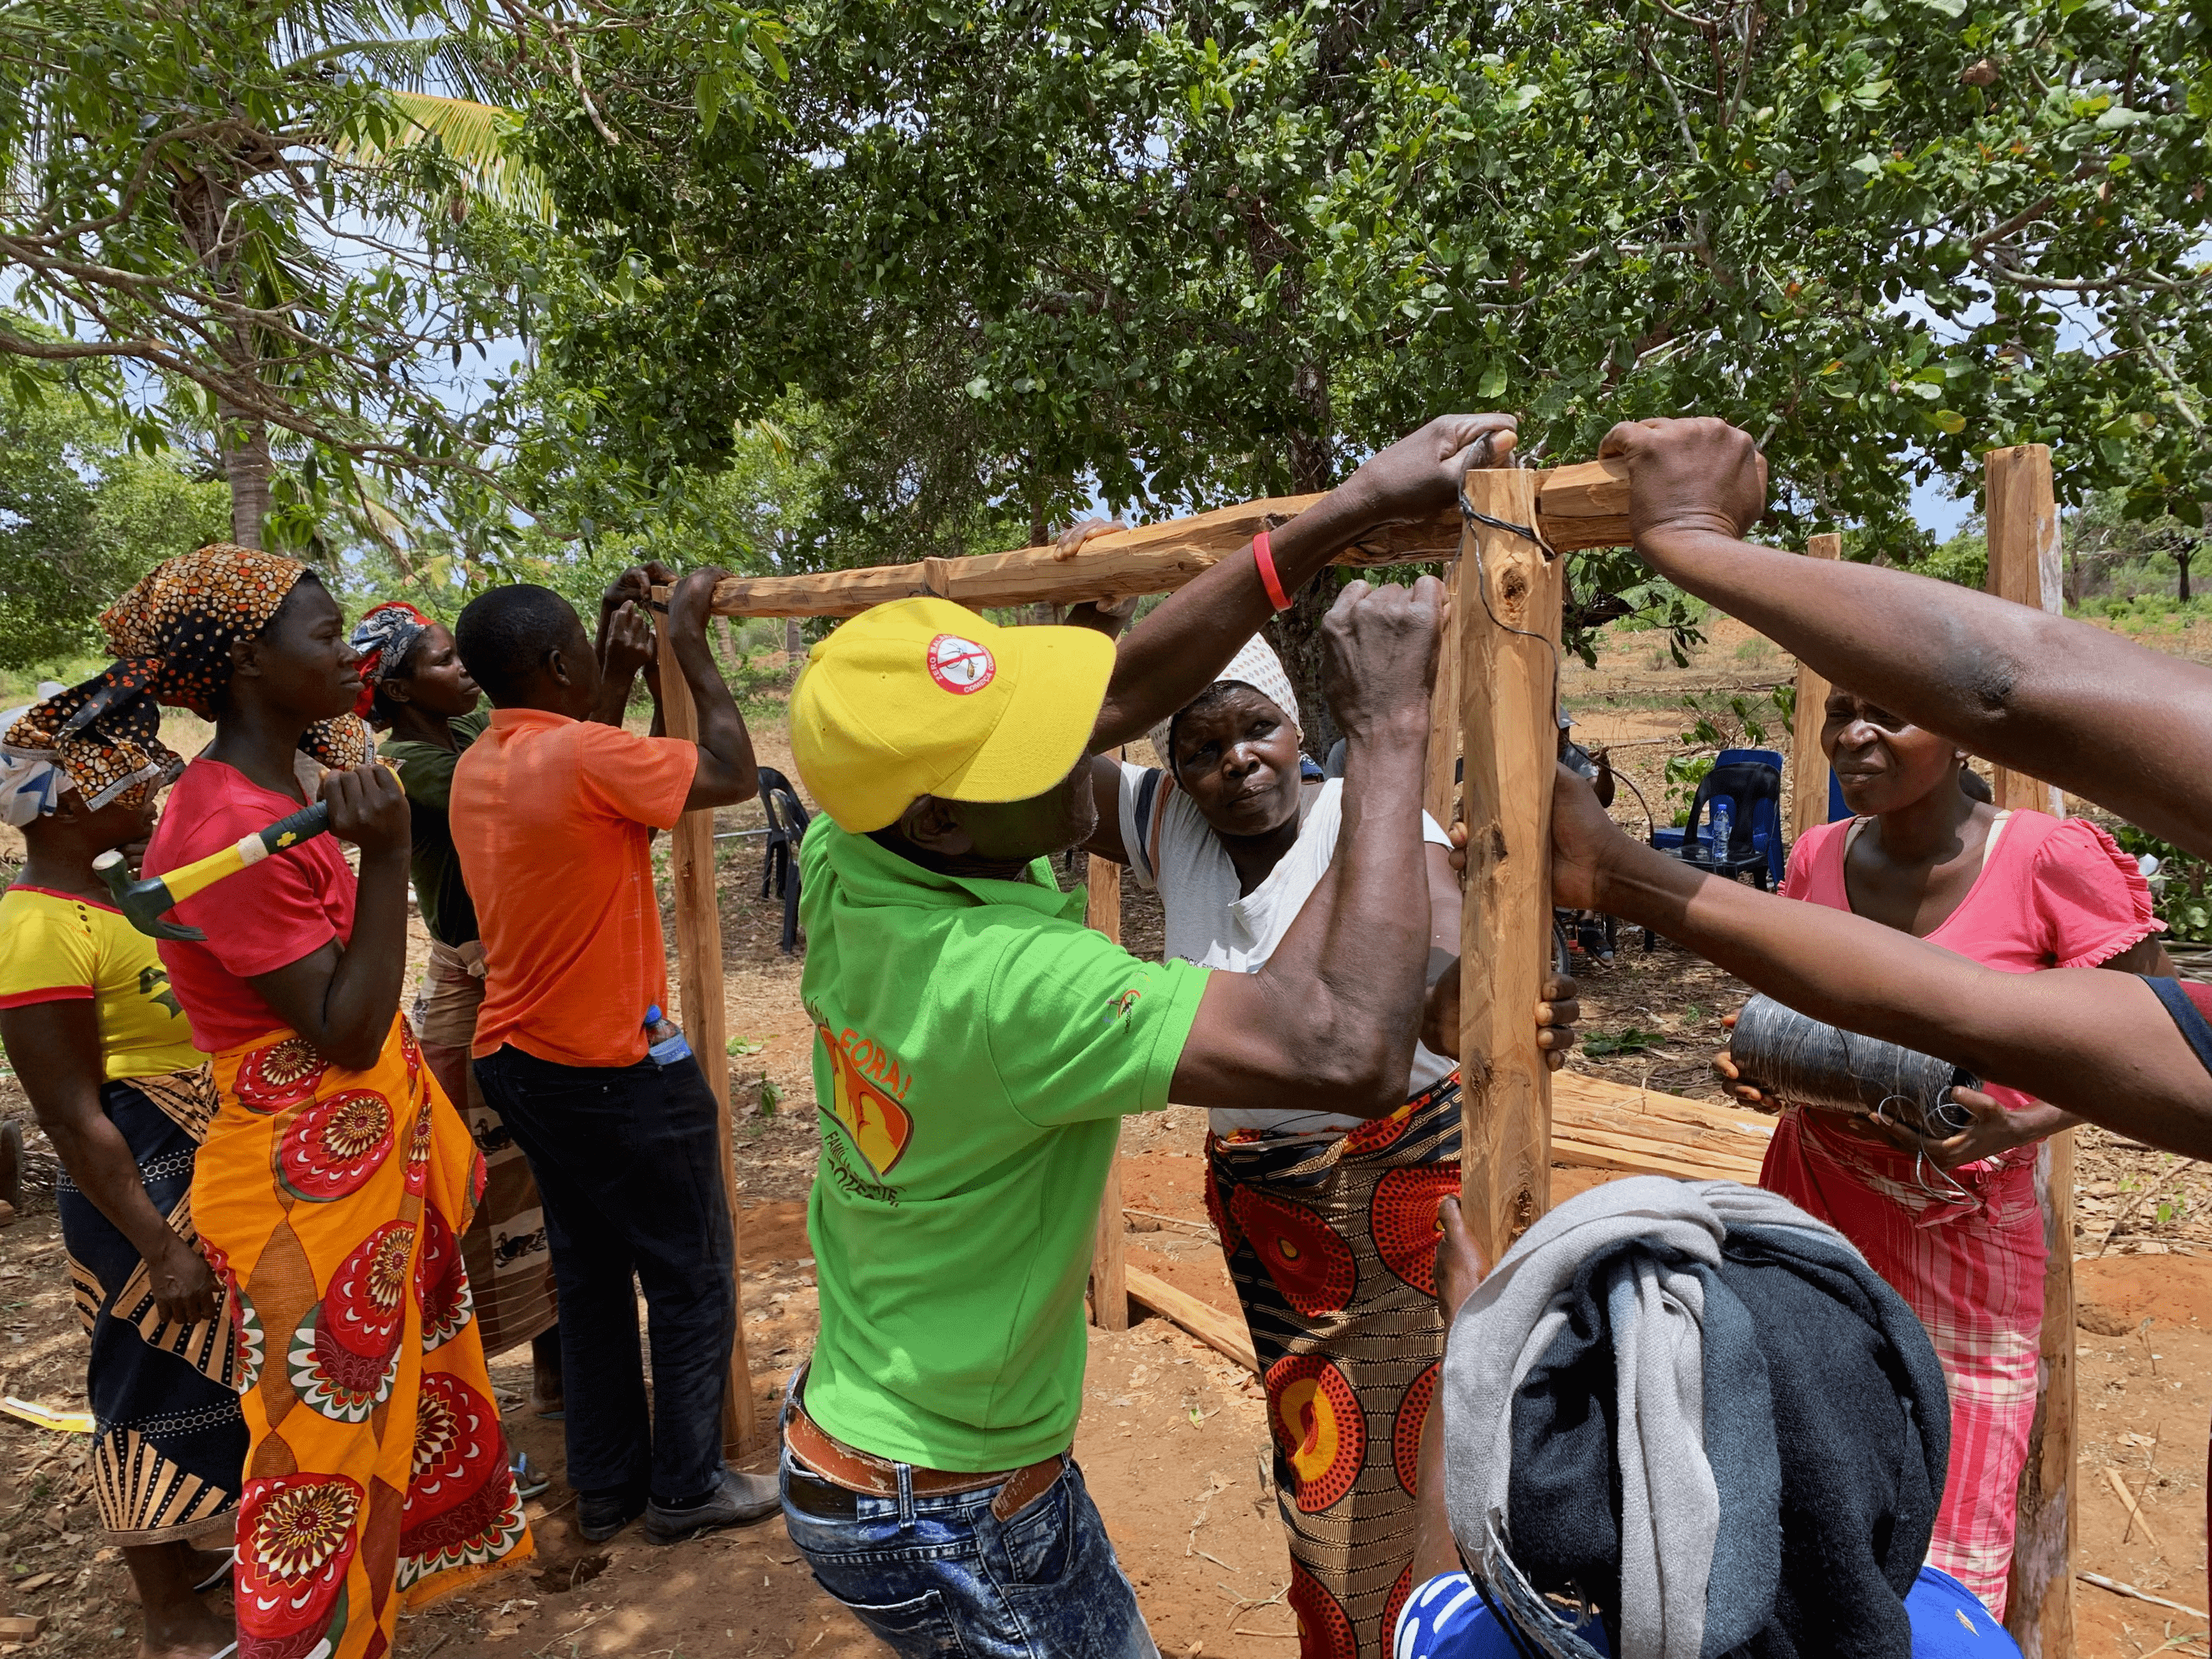 People with disabilities, facilitators, and design experts work together for climate action, building storage for grain and produce. Several people are building a wooden structure with three main poles.